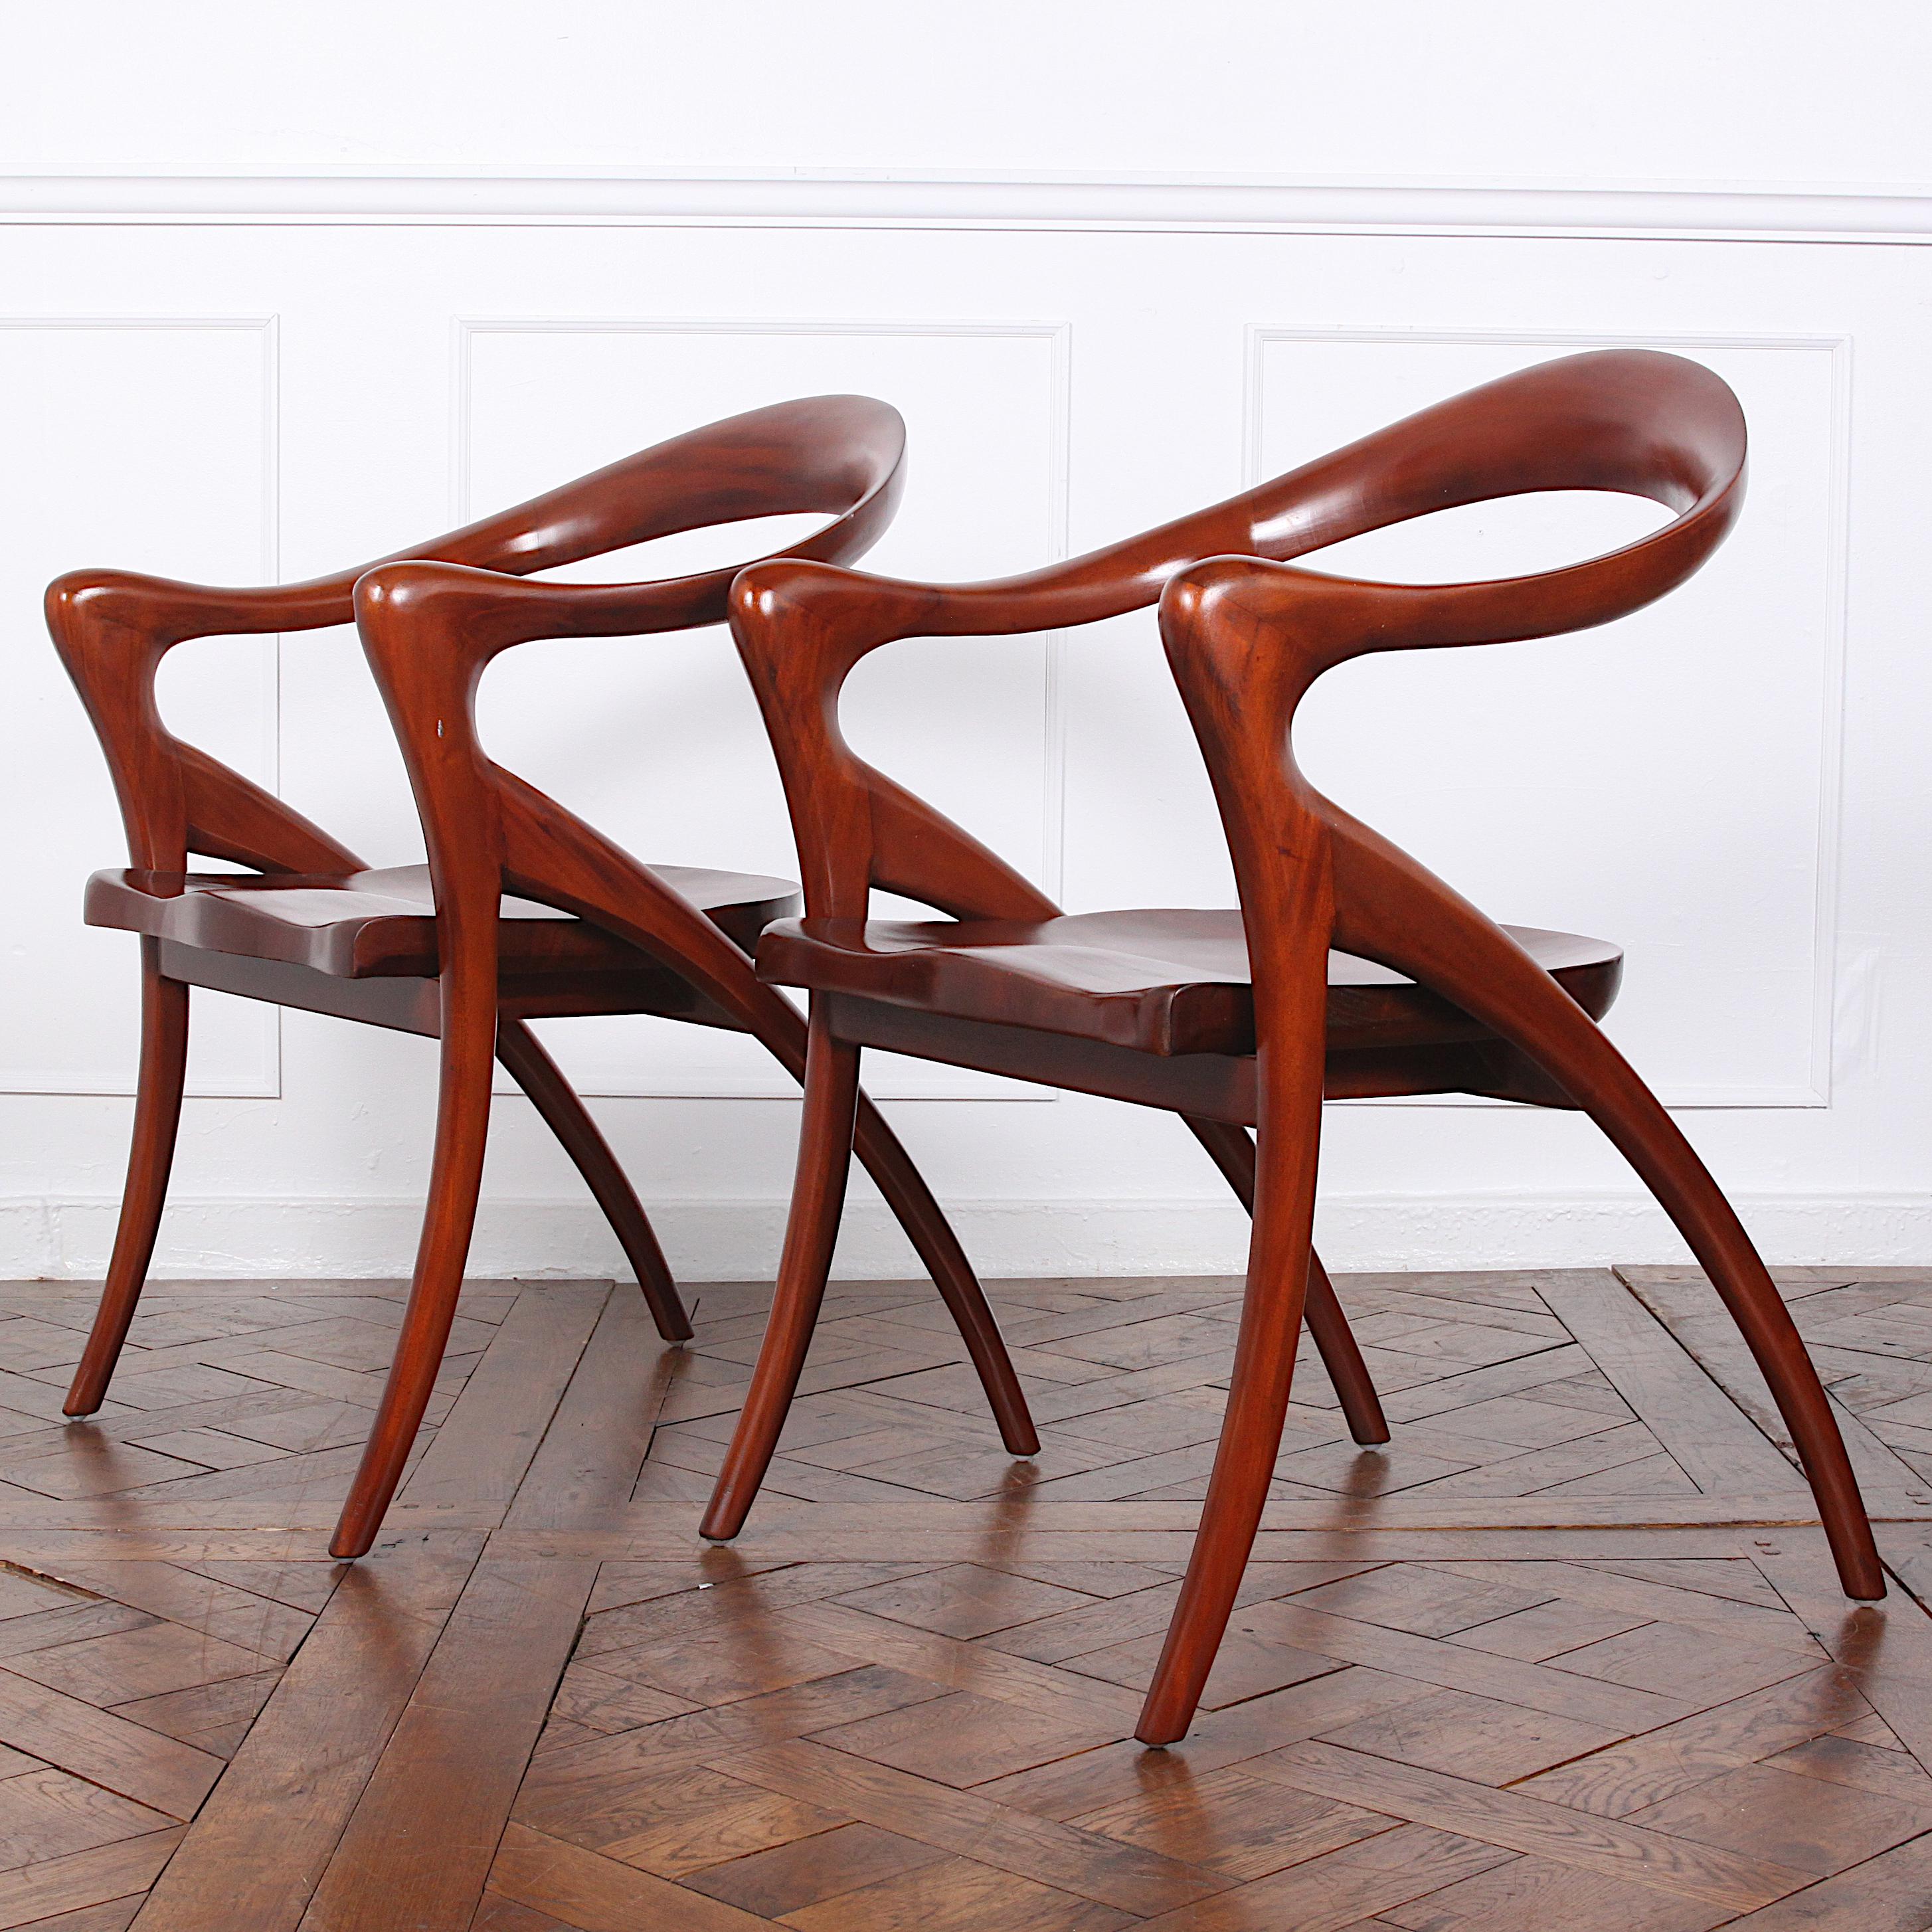 Pair of Grands fauteuils by Olivier de Schrijver (born in 1958). Model “Ode à la femme” with sinuous shaped mahogany armrests and back and with sculpted curved seats.